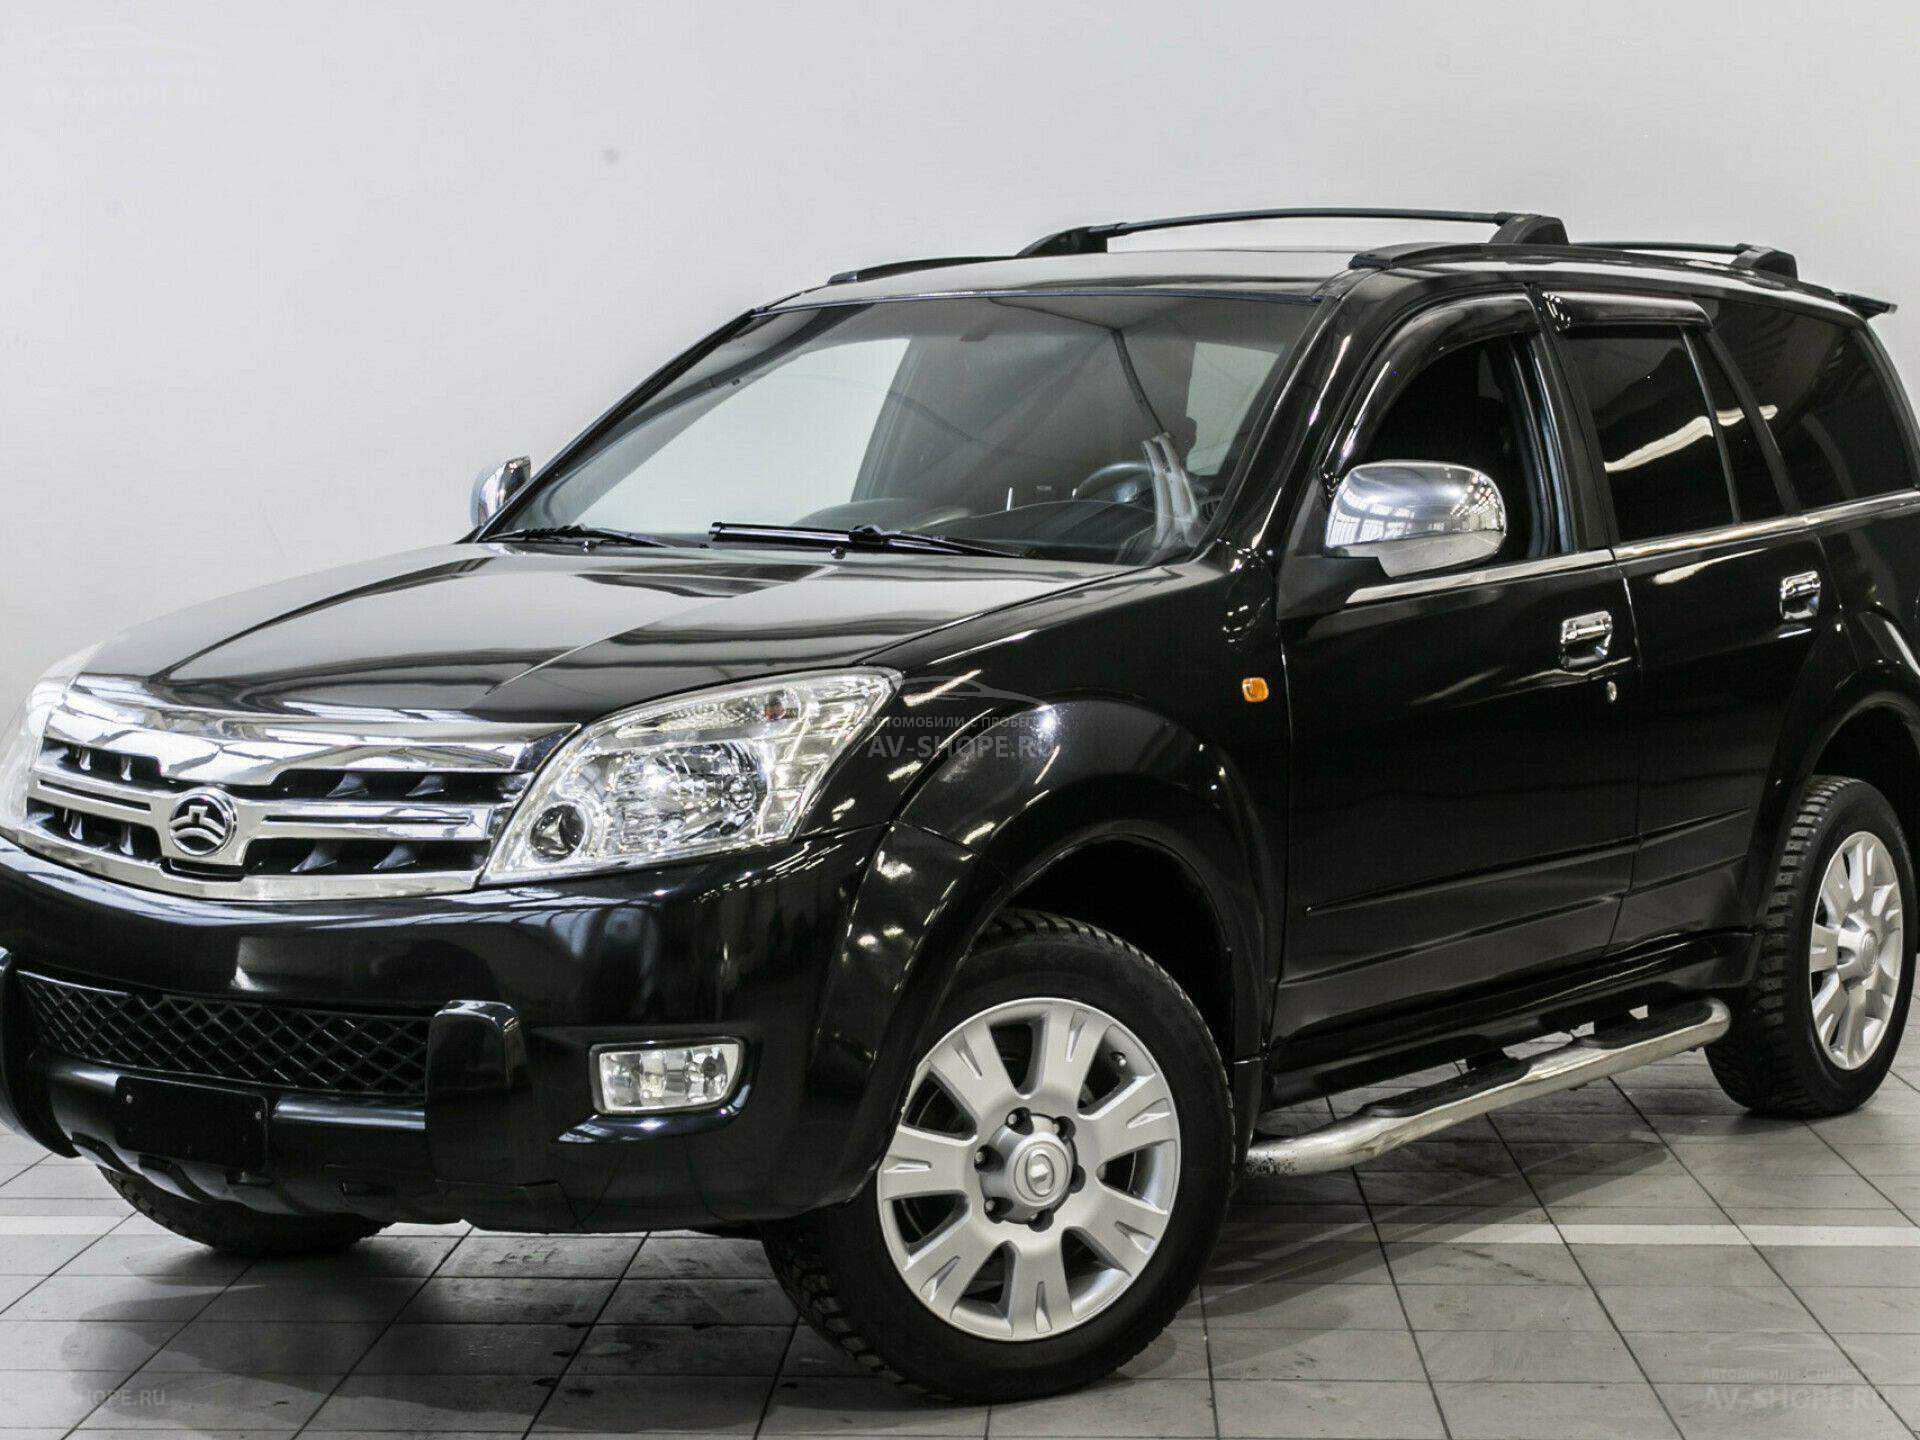 Купить ховер h3. Great Wall Hover 2008. Great Wall Hover 2.4 MT 2008. Great Wall Hover 2008г. Great Wall Hover 2.8 МТ, 2008.